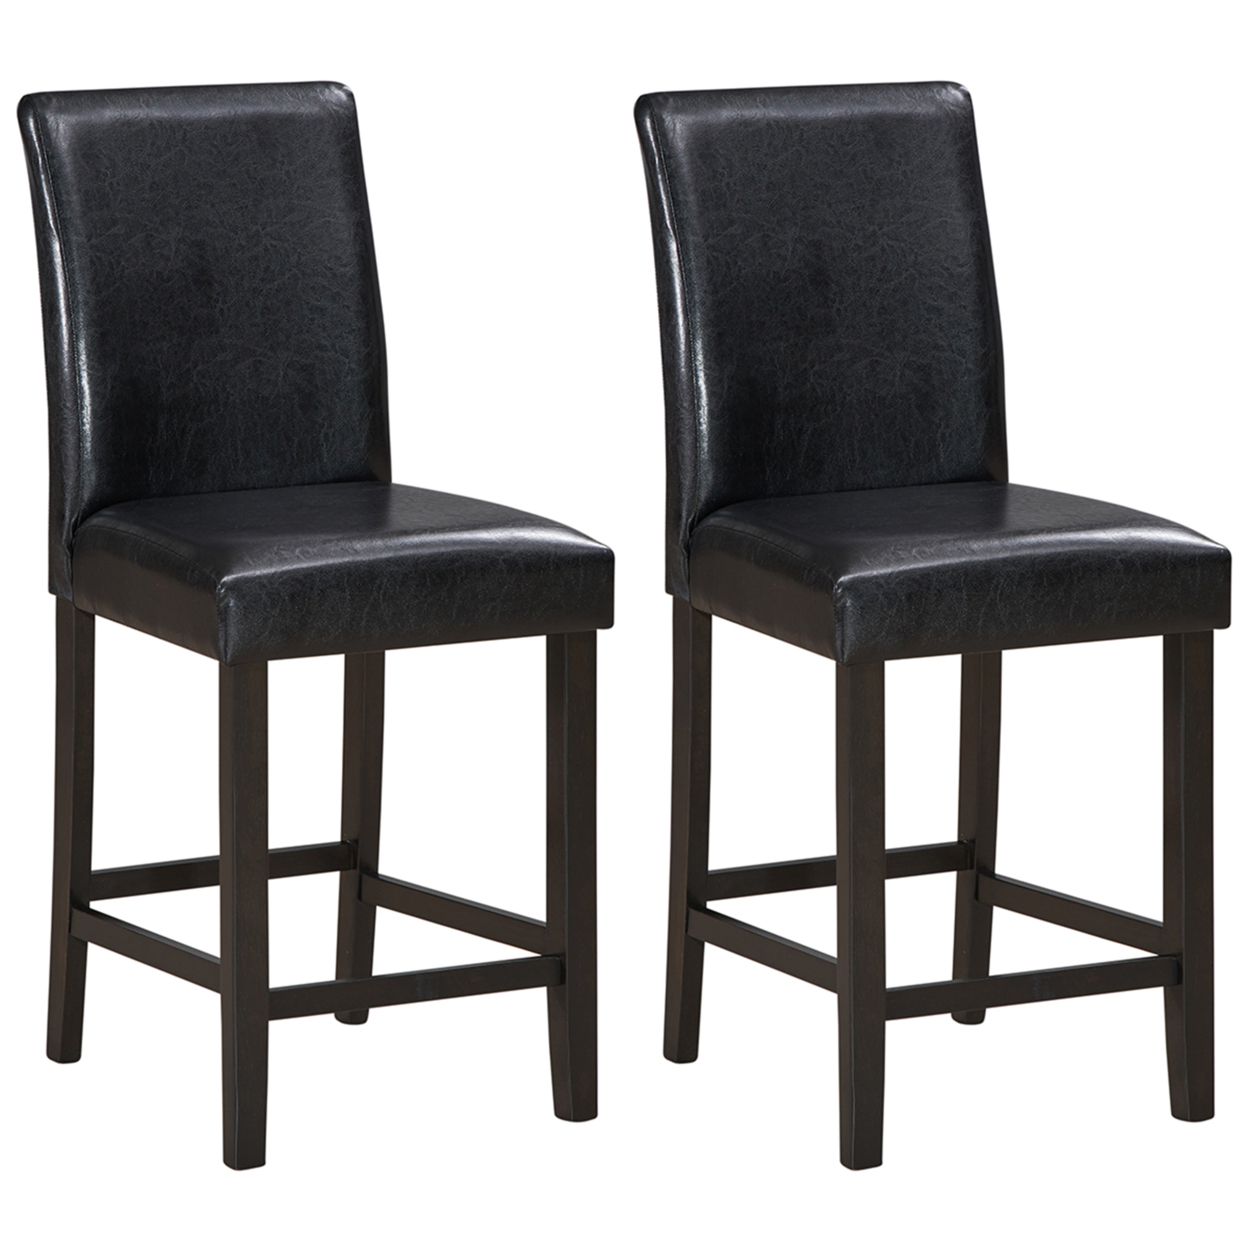 Set Of 2 Bar Stools 25inch Counter Height Barstool Pub Chair W/Rubber Wood Legs